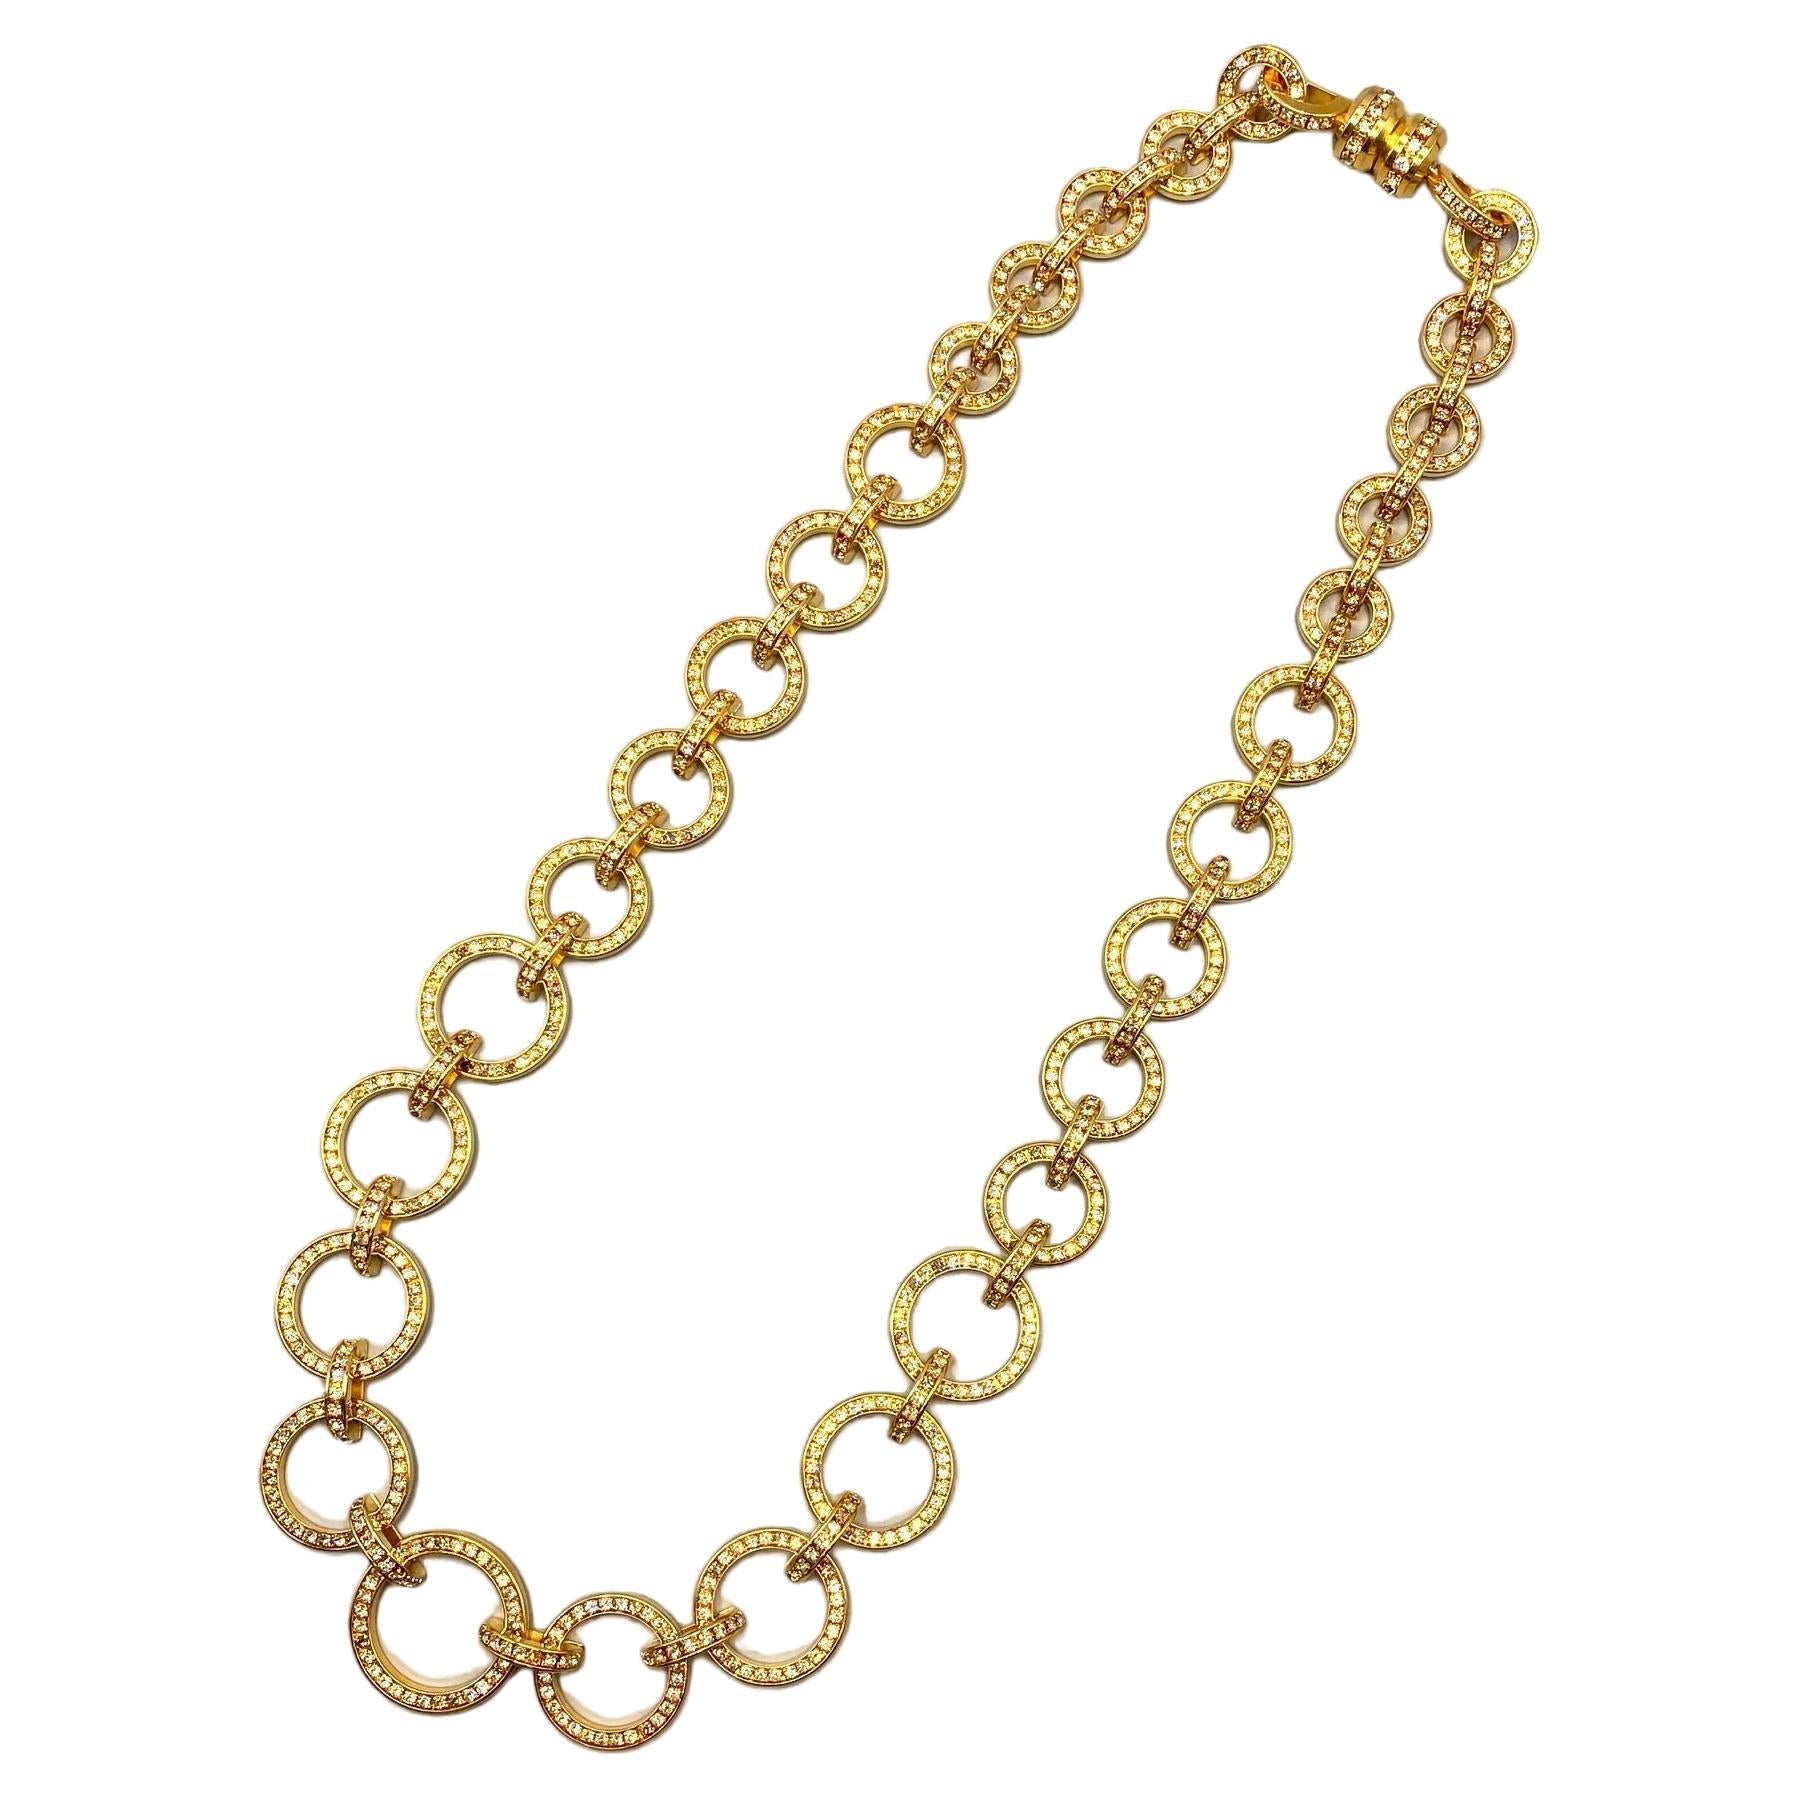 A lovely eye catching gold and rhinestone set long necklace by Valentino Garavani of Italy. The necklace is graduated with the smallest ring links .75 of an inch in diameter up to the largest ring at the bottom center of 1.38 inches in diameter. The